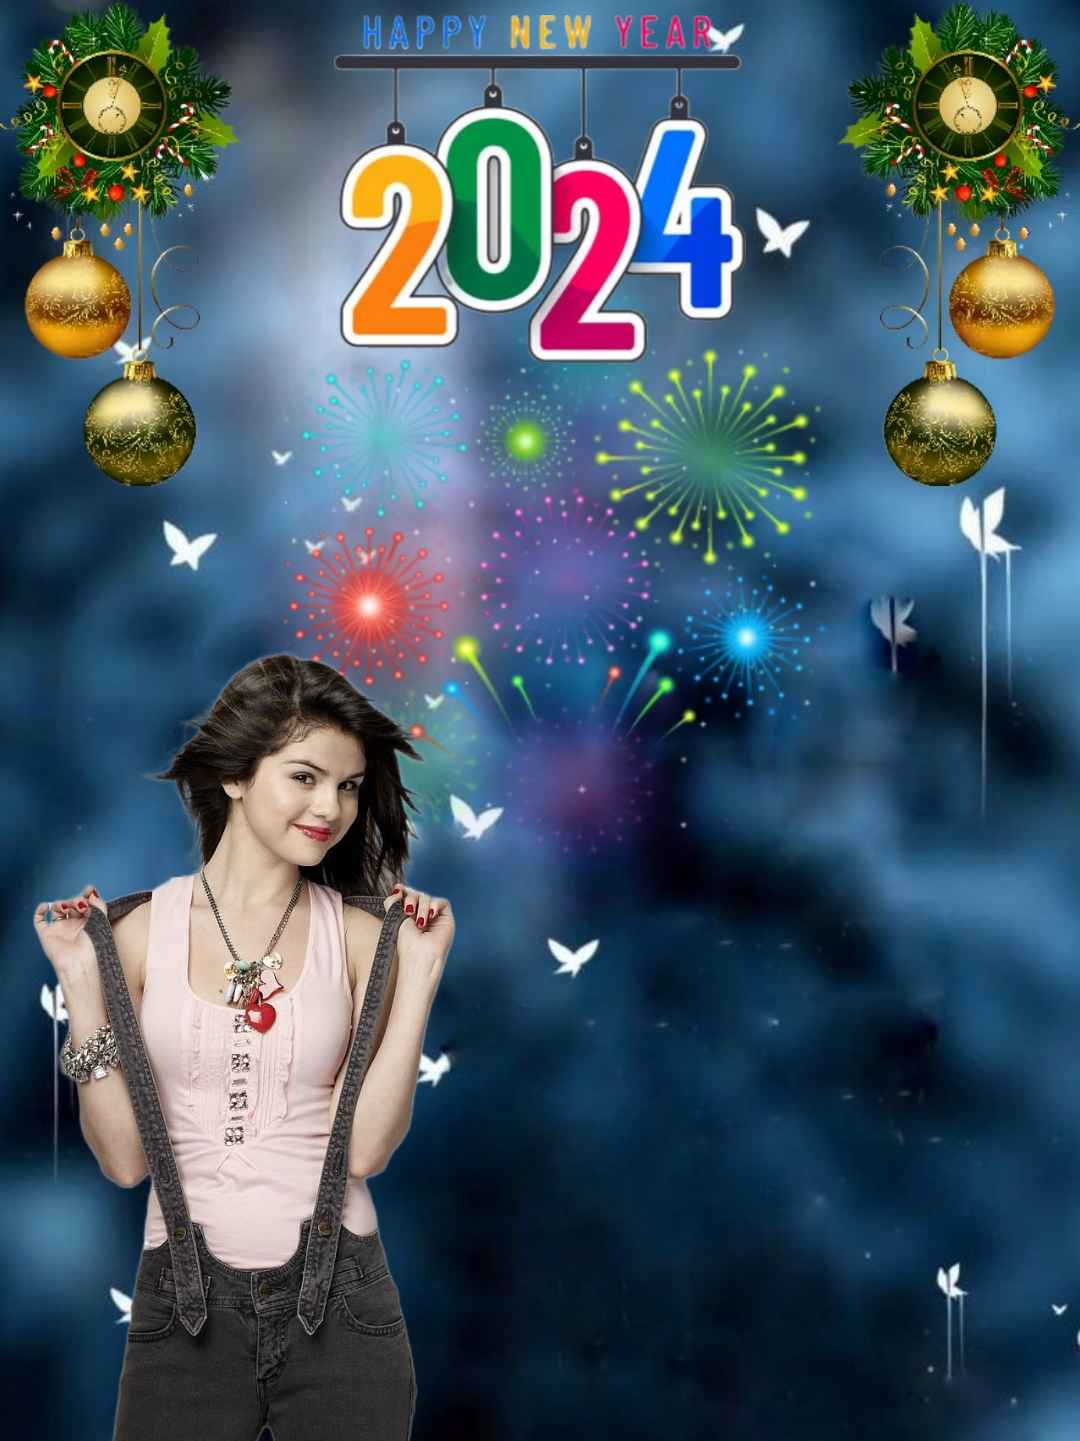 New Year 2024 CB Background HD Image